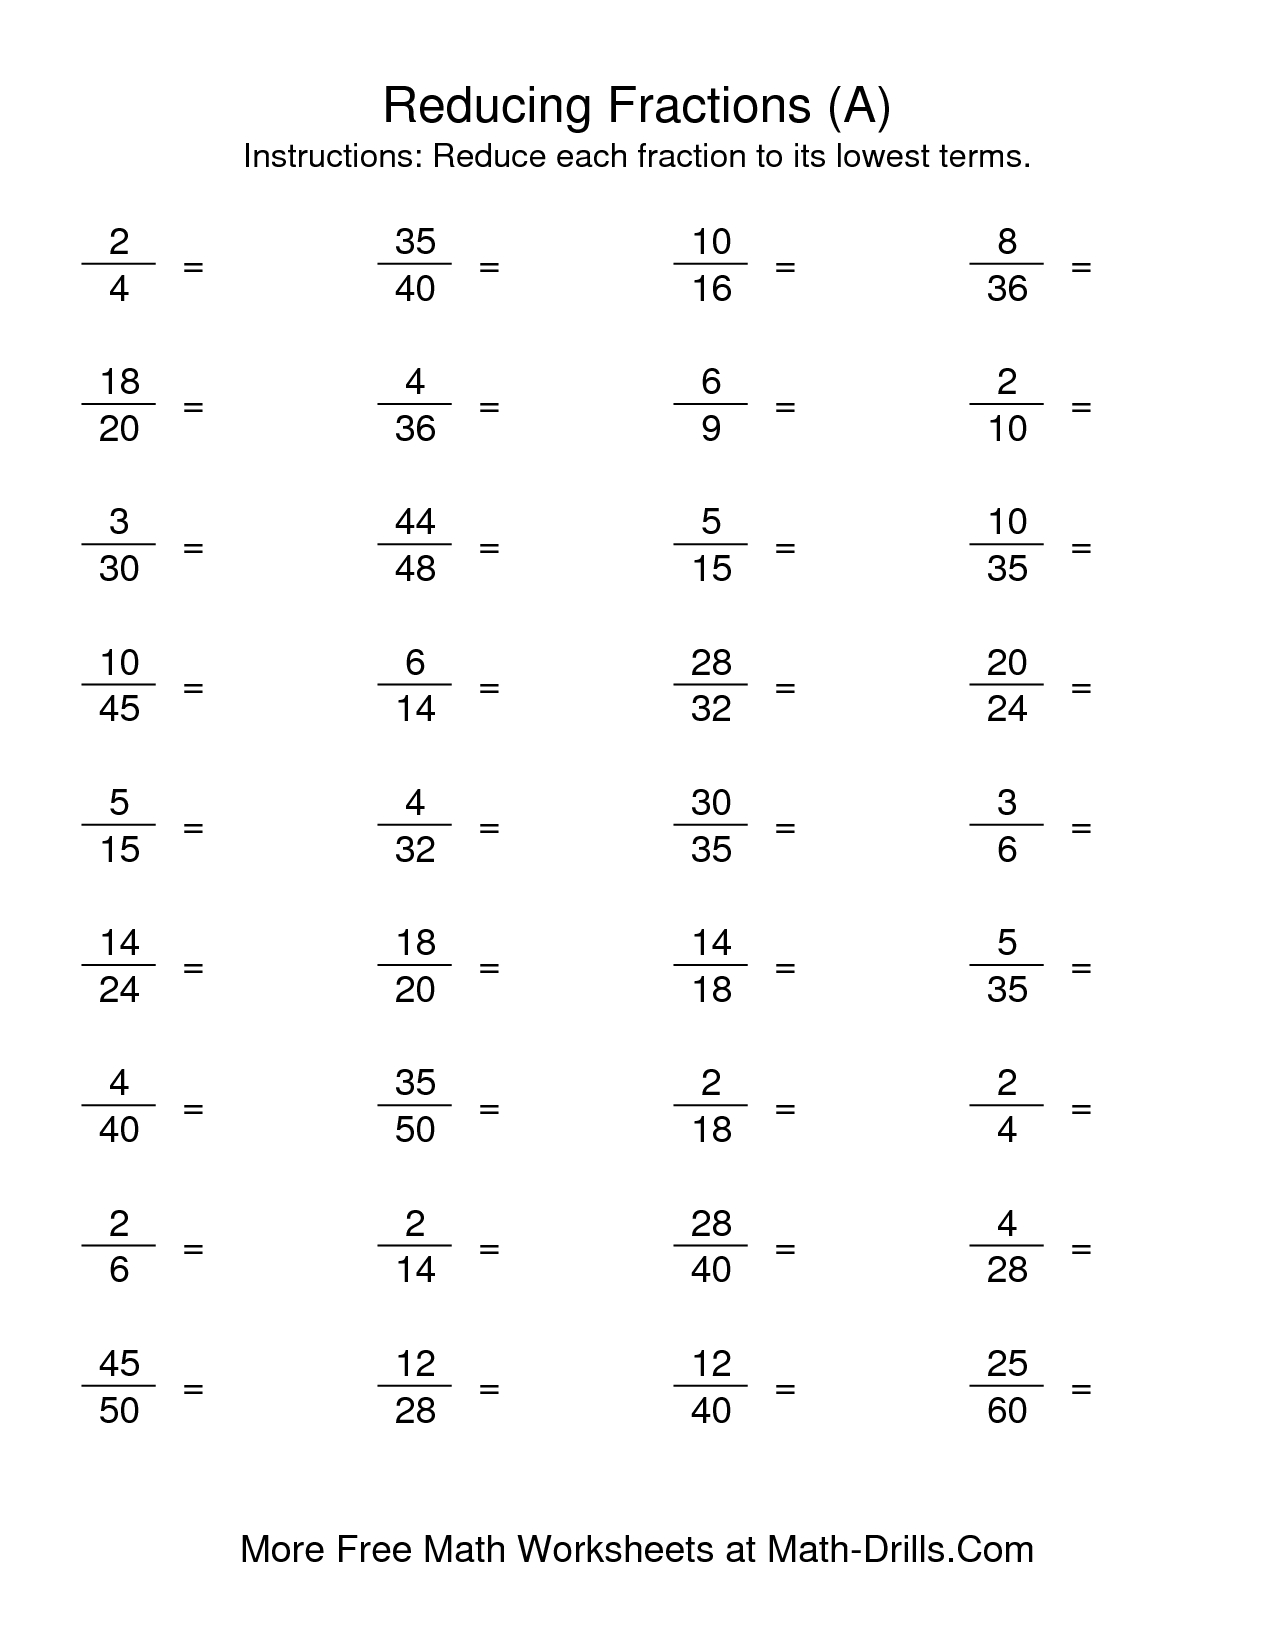 free-printable-simplifying-fractions-worksheets-lexia-s-blog